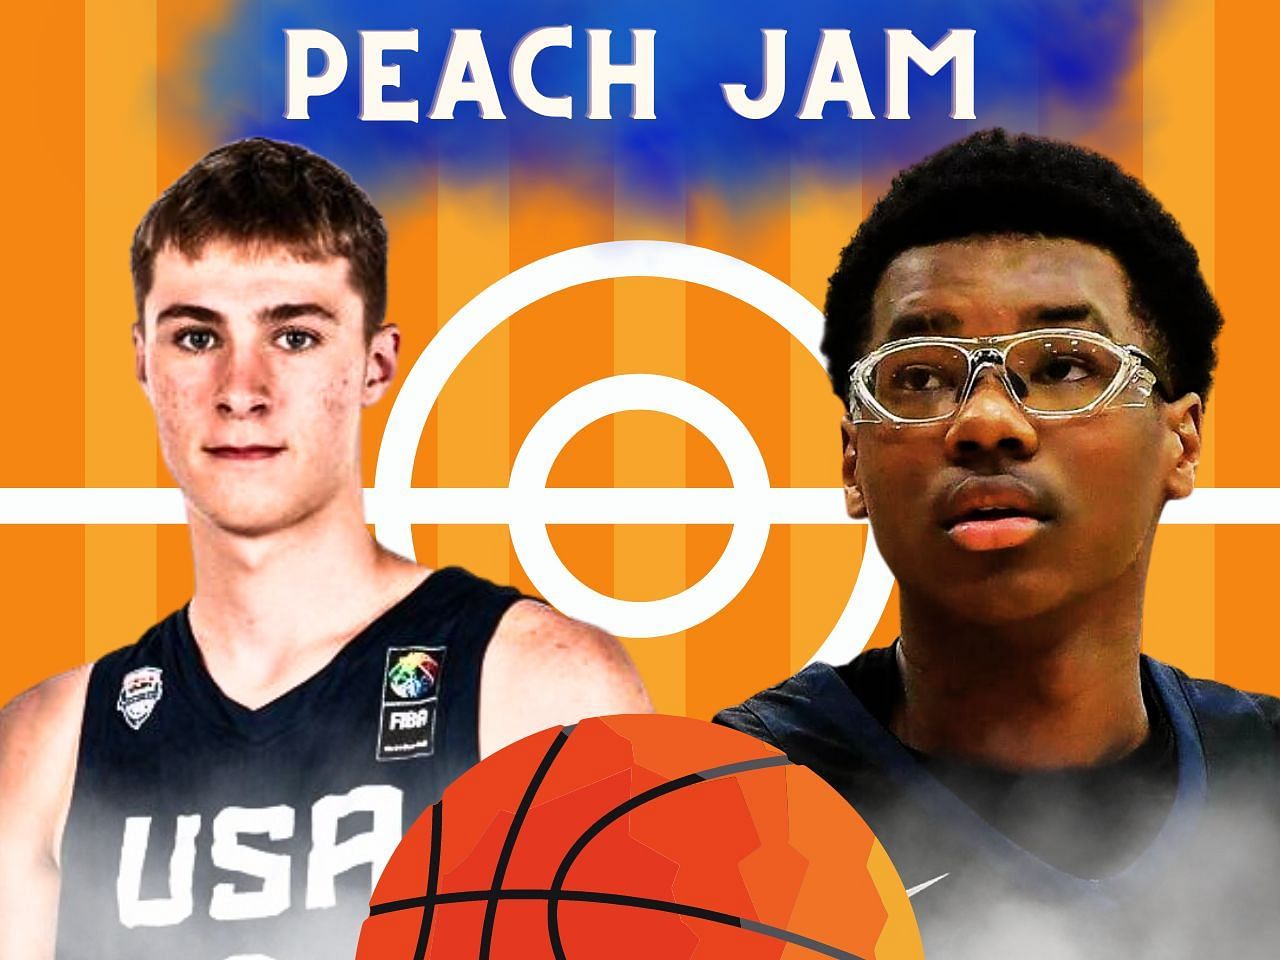 What is Peach Jam basketball? Looking at top players appearing in the